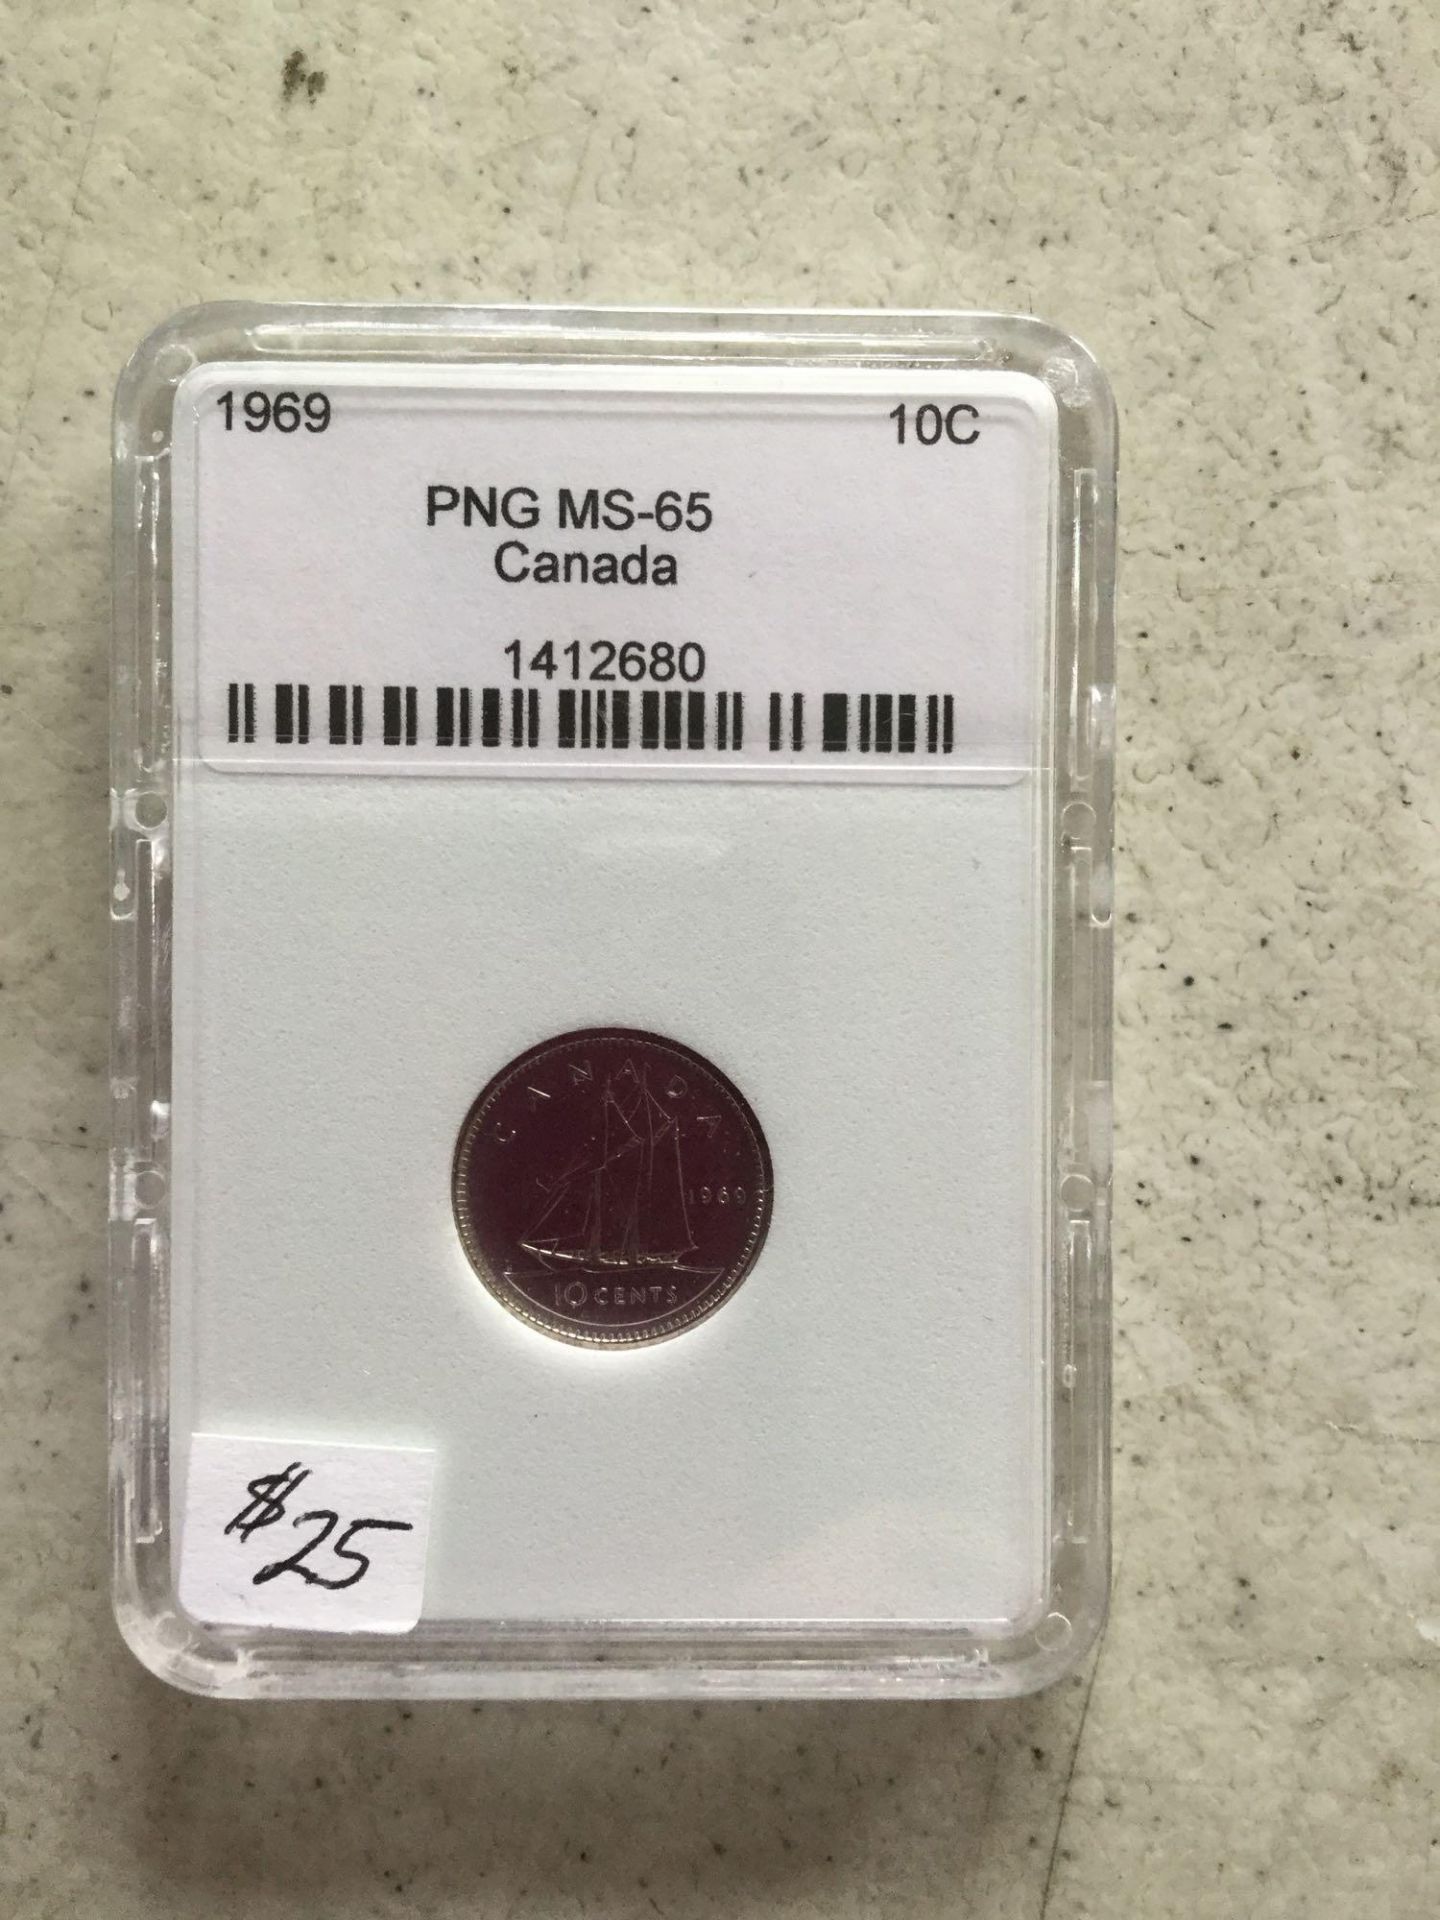 Canada 1969 10 Cent Coin PNG MS-65